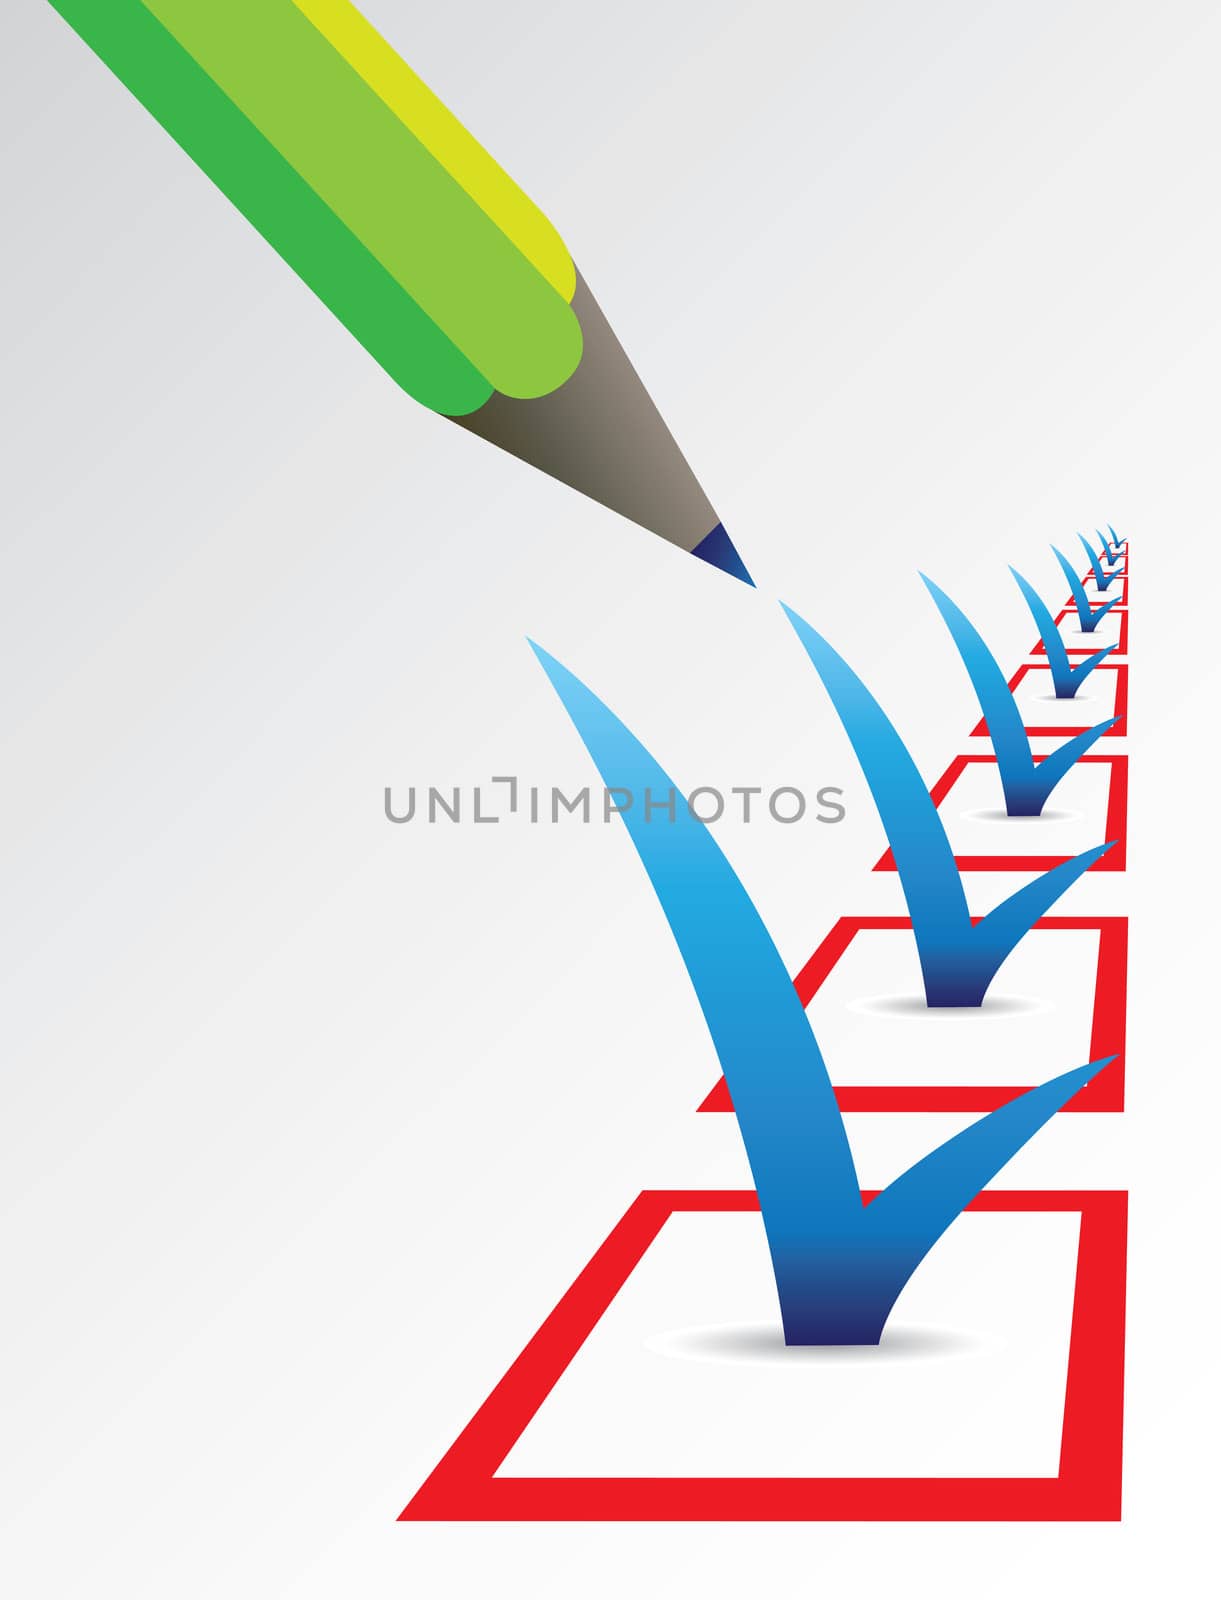 Conceptual vector illustration with pencil selecting the check boxes with blue tick signs